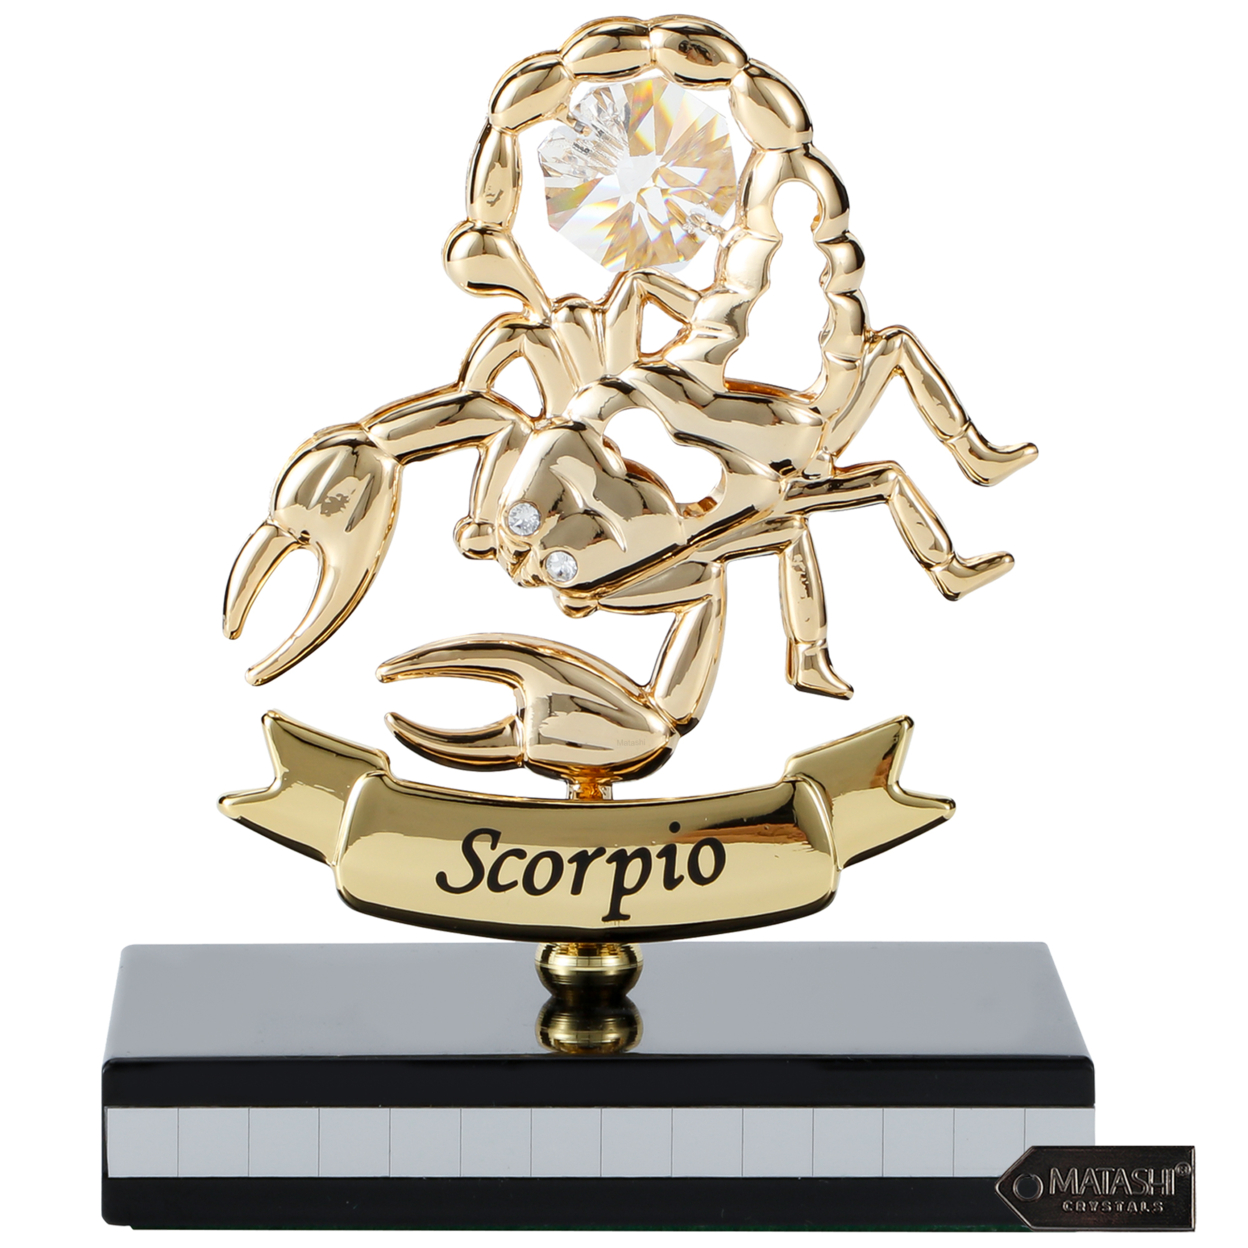 Matashi 24K Gold Plated Zodiac Astrological Sign Scorpio Figurine Statuette On Stand Studded With Crystals Gift For Mom Girlfriend Wife Dad